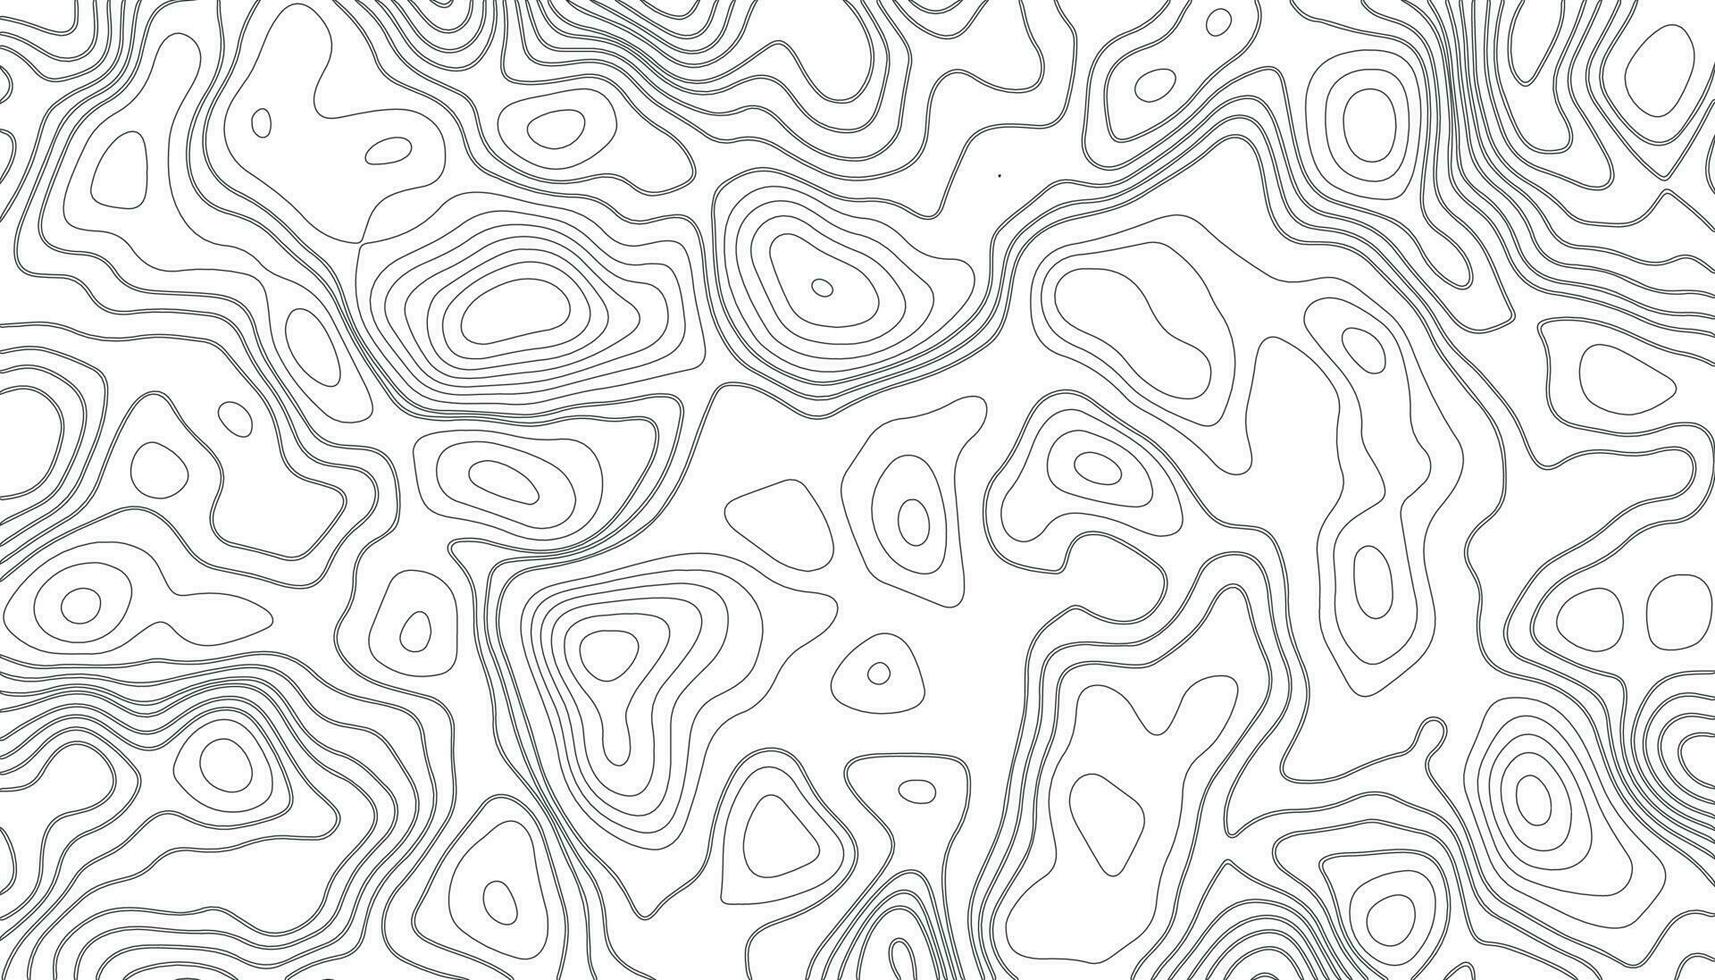 Background of the topographic map. Topographic map lines vector